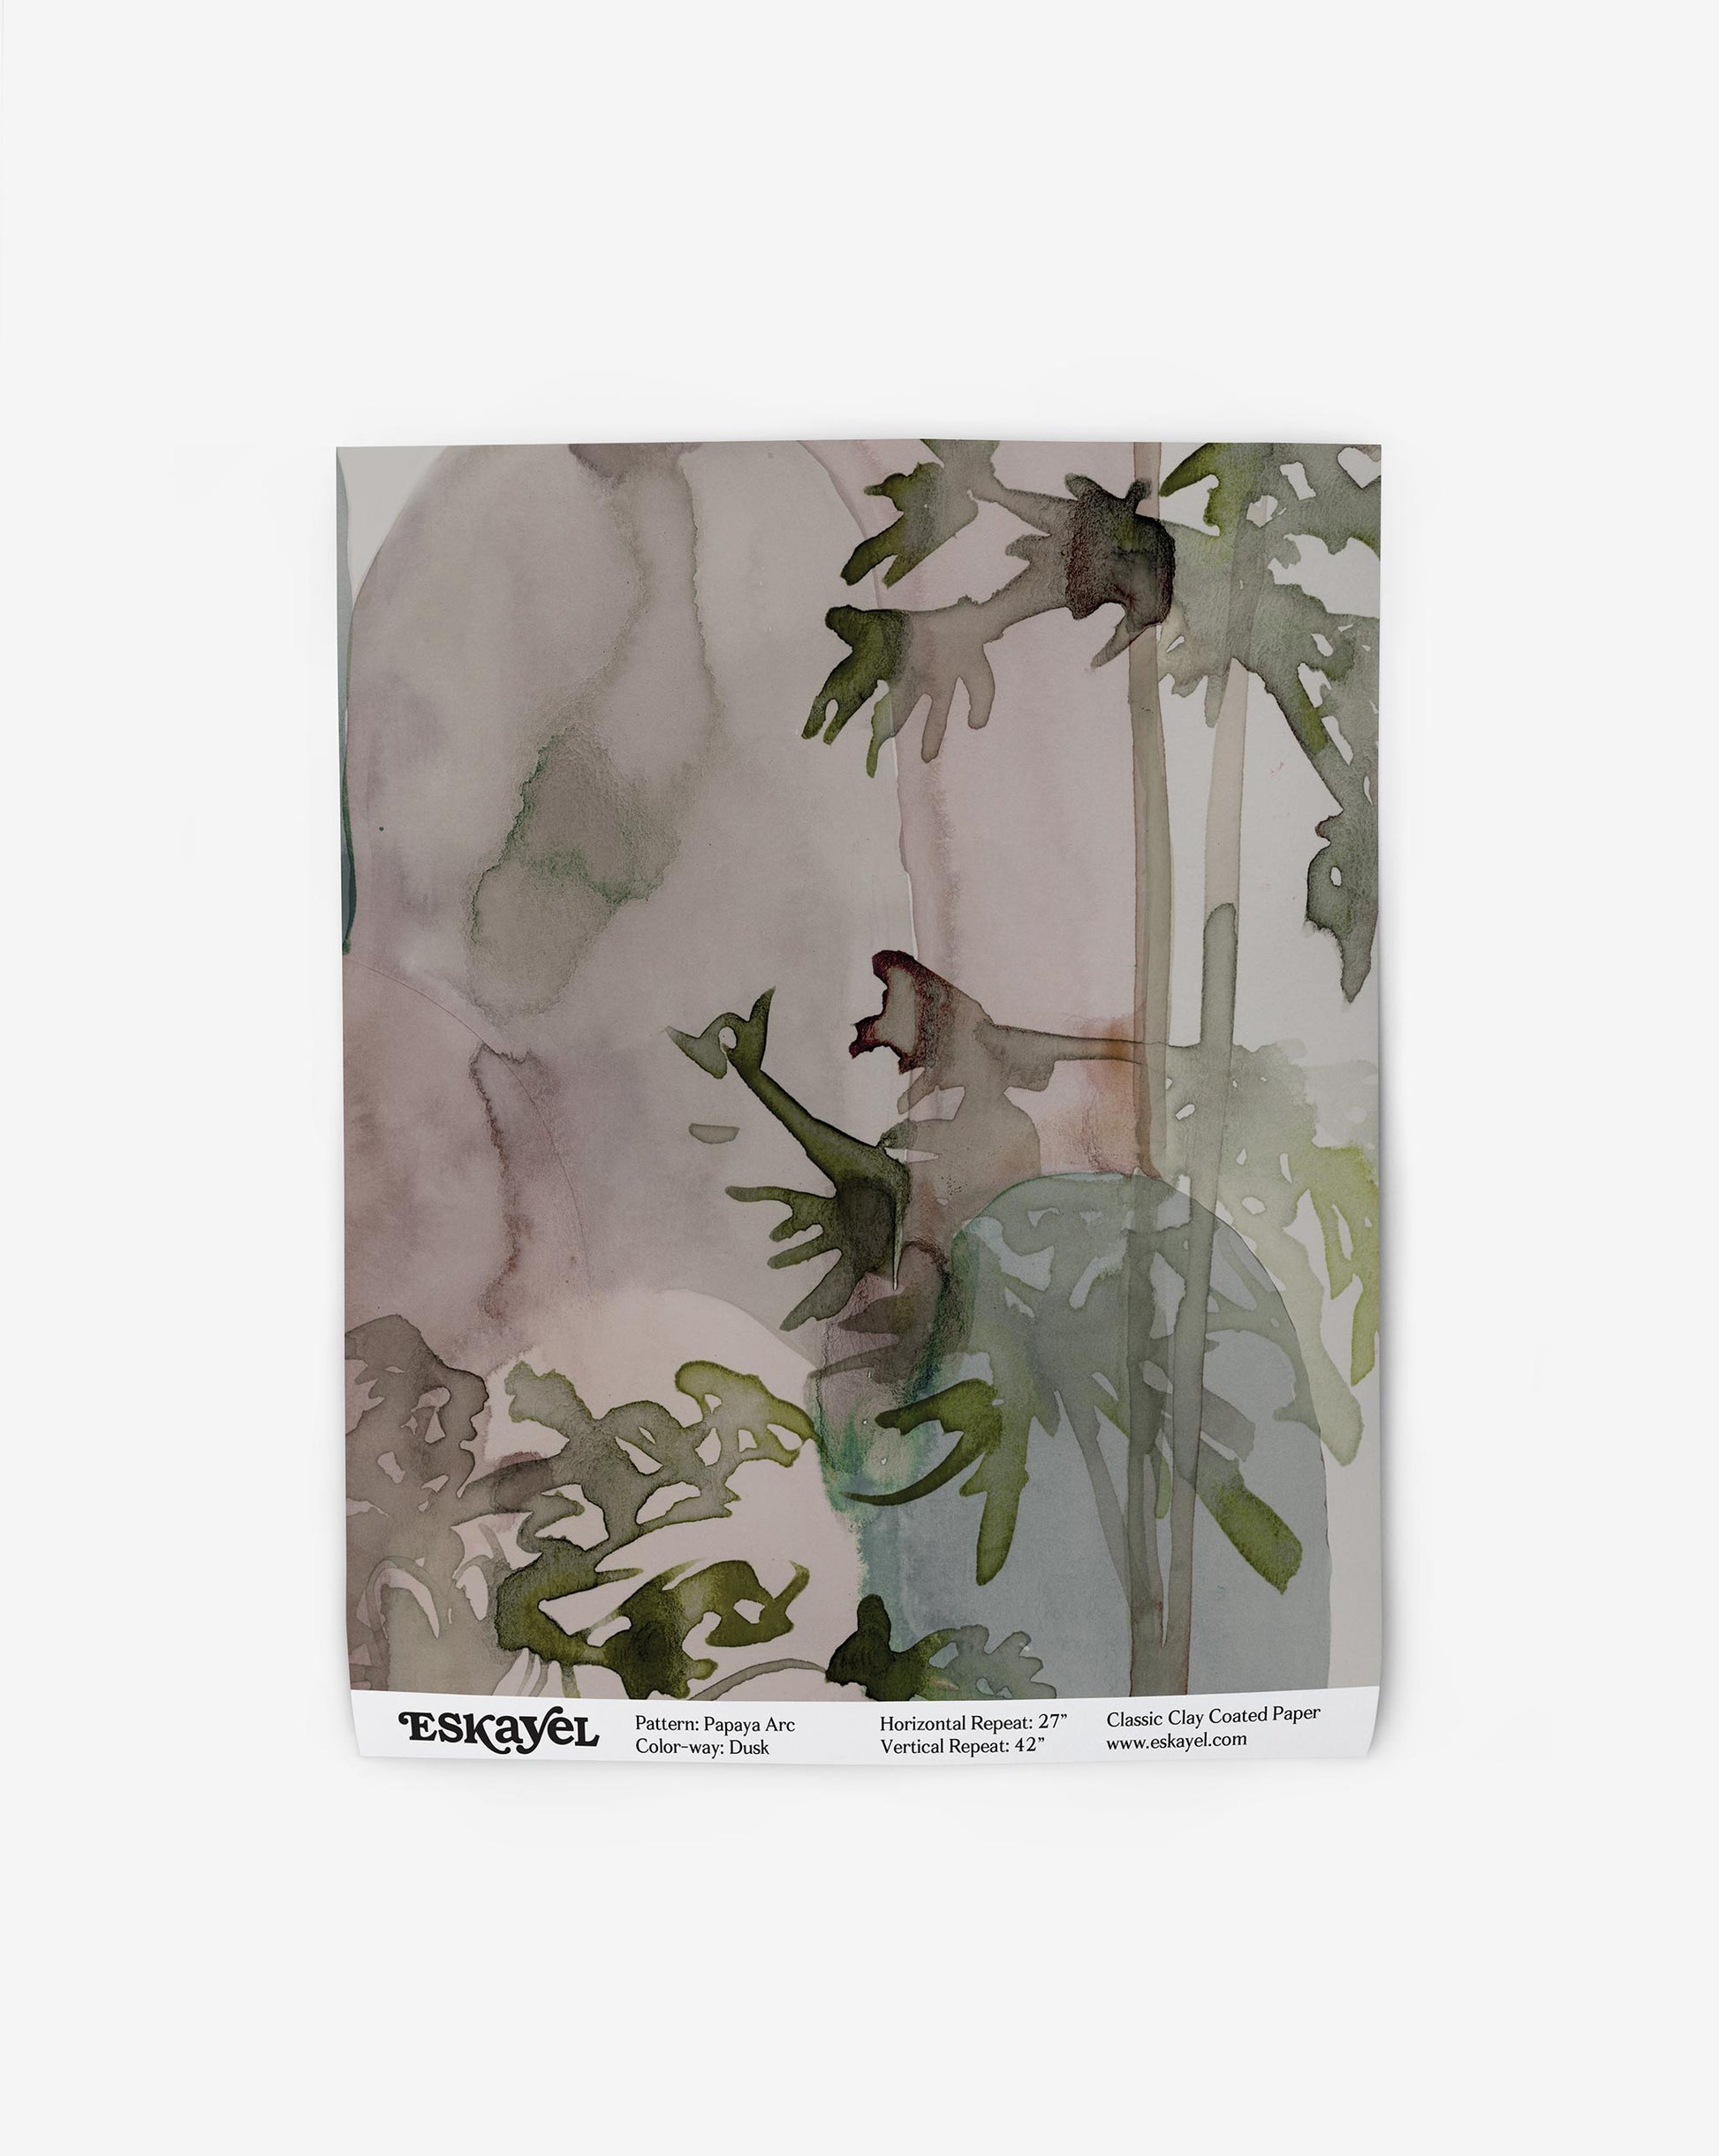 A watercolor painting of a monkey in a jungle with Papaya Arc Wallpaper Dusk